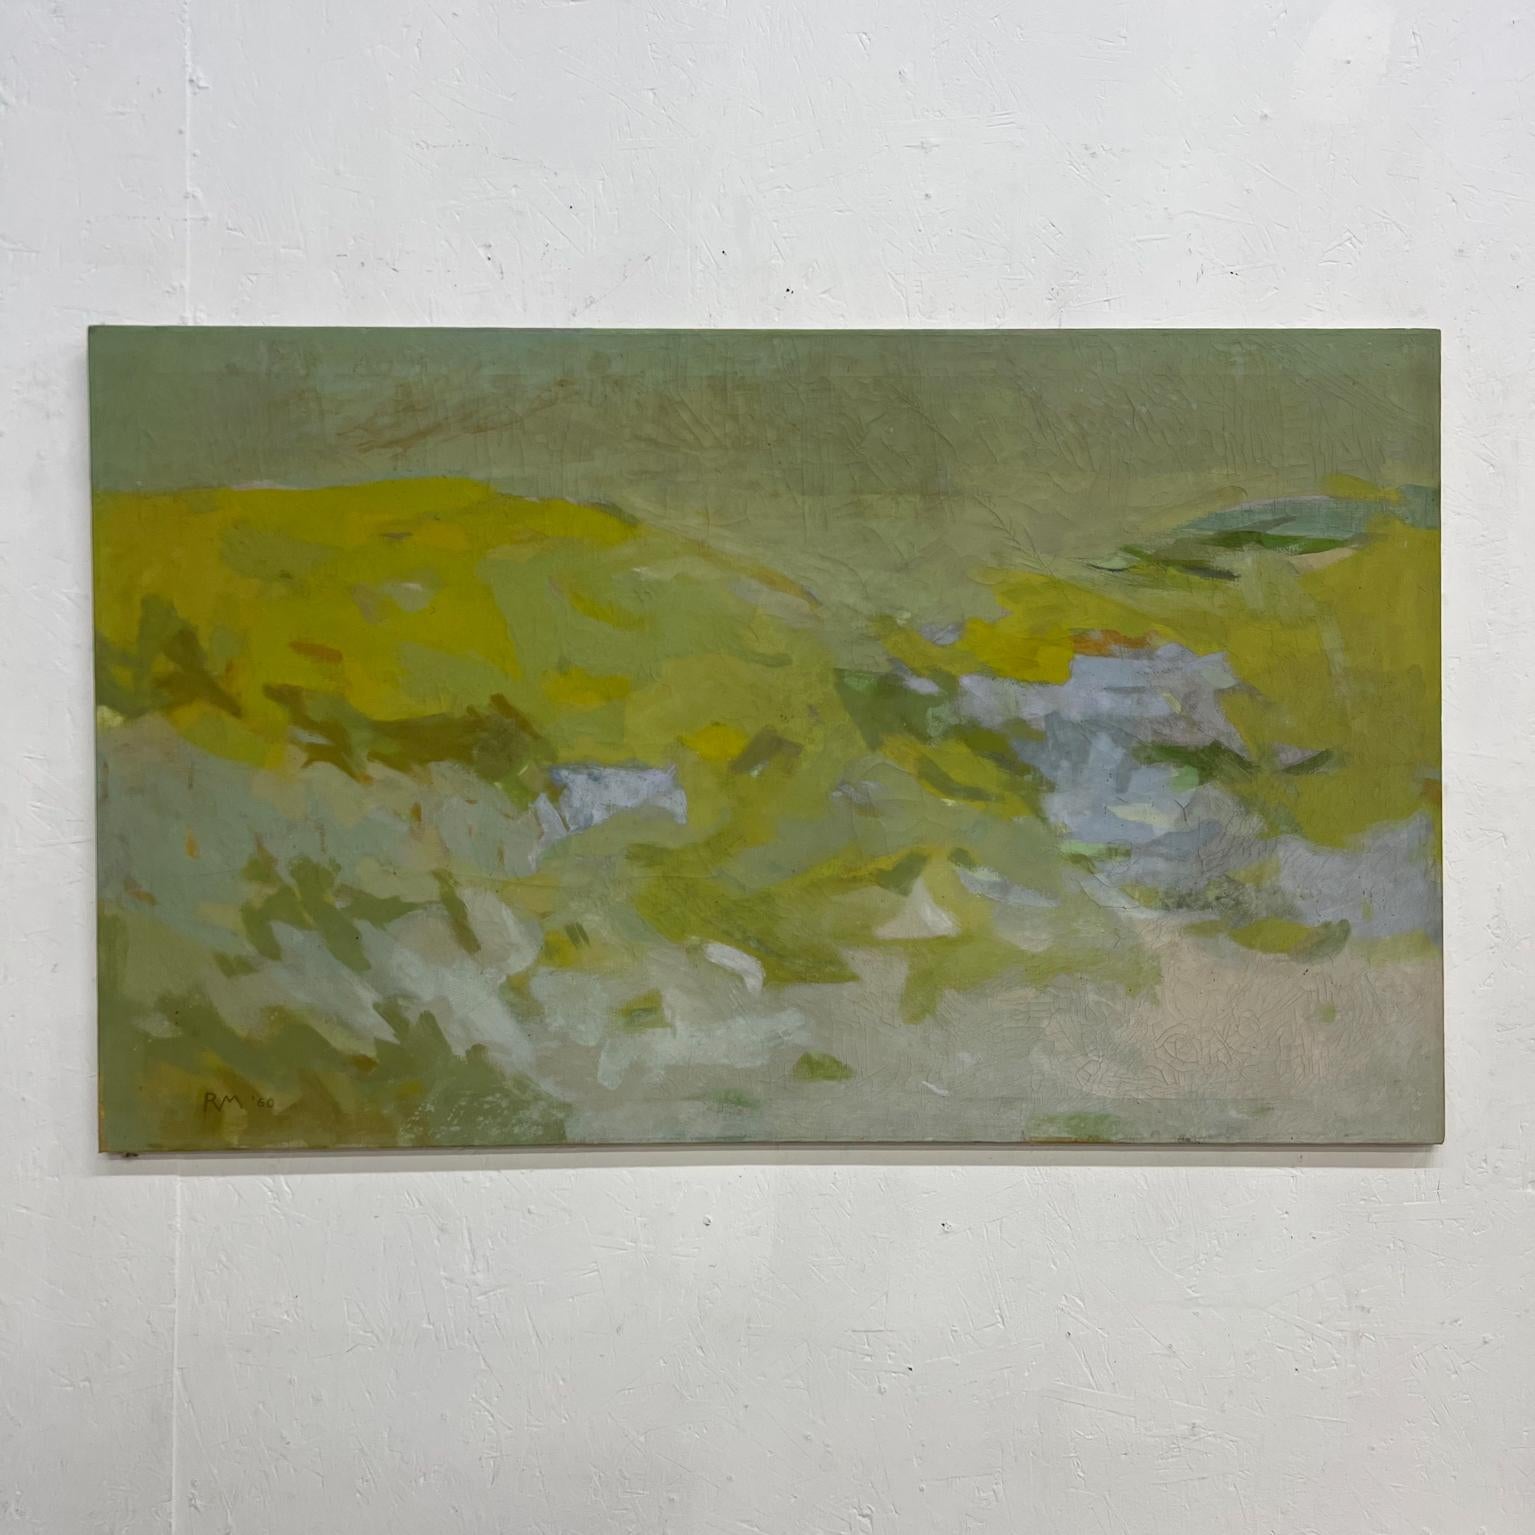 1960 Abstract Art Green landscape oil on canvas painting artist RM
46 x 28 x 2 thick
Preowned original unrestored vintage condition art.
See images provided.